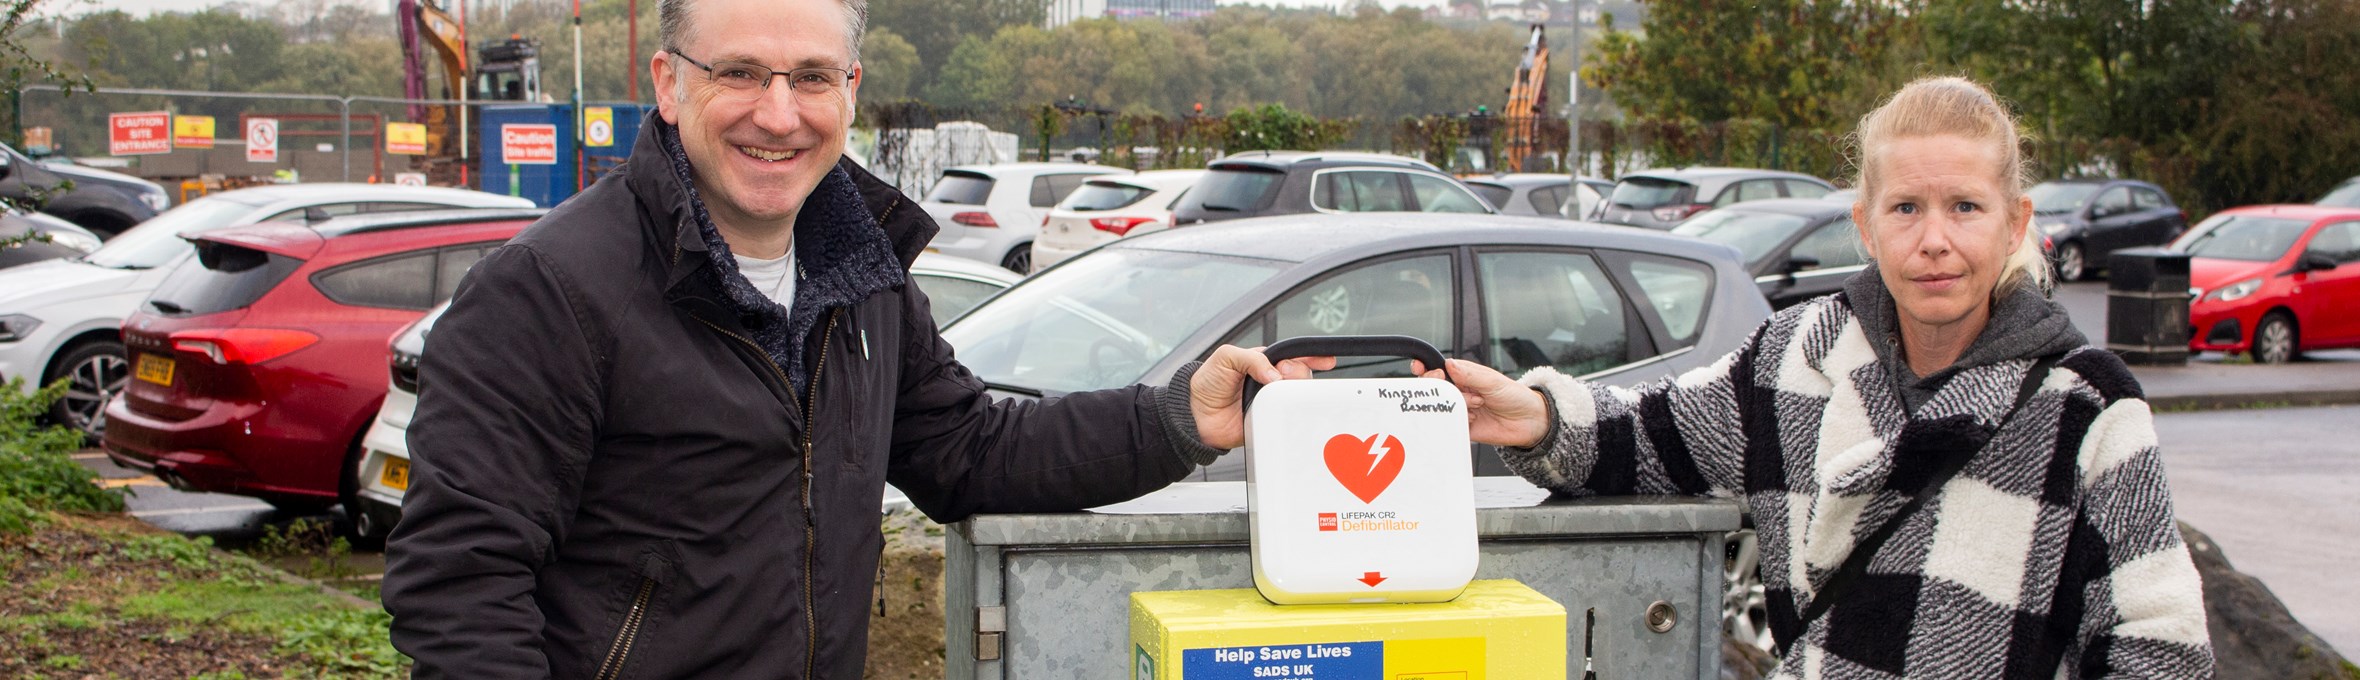 cllr matthew relf and cllr vicki heslop with the defibrillator at Kings Mill Reservoir 